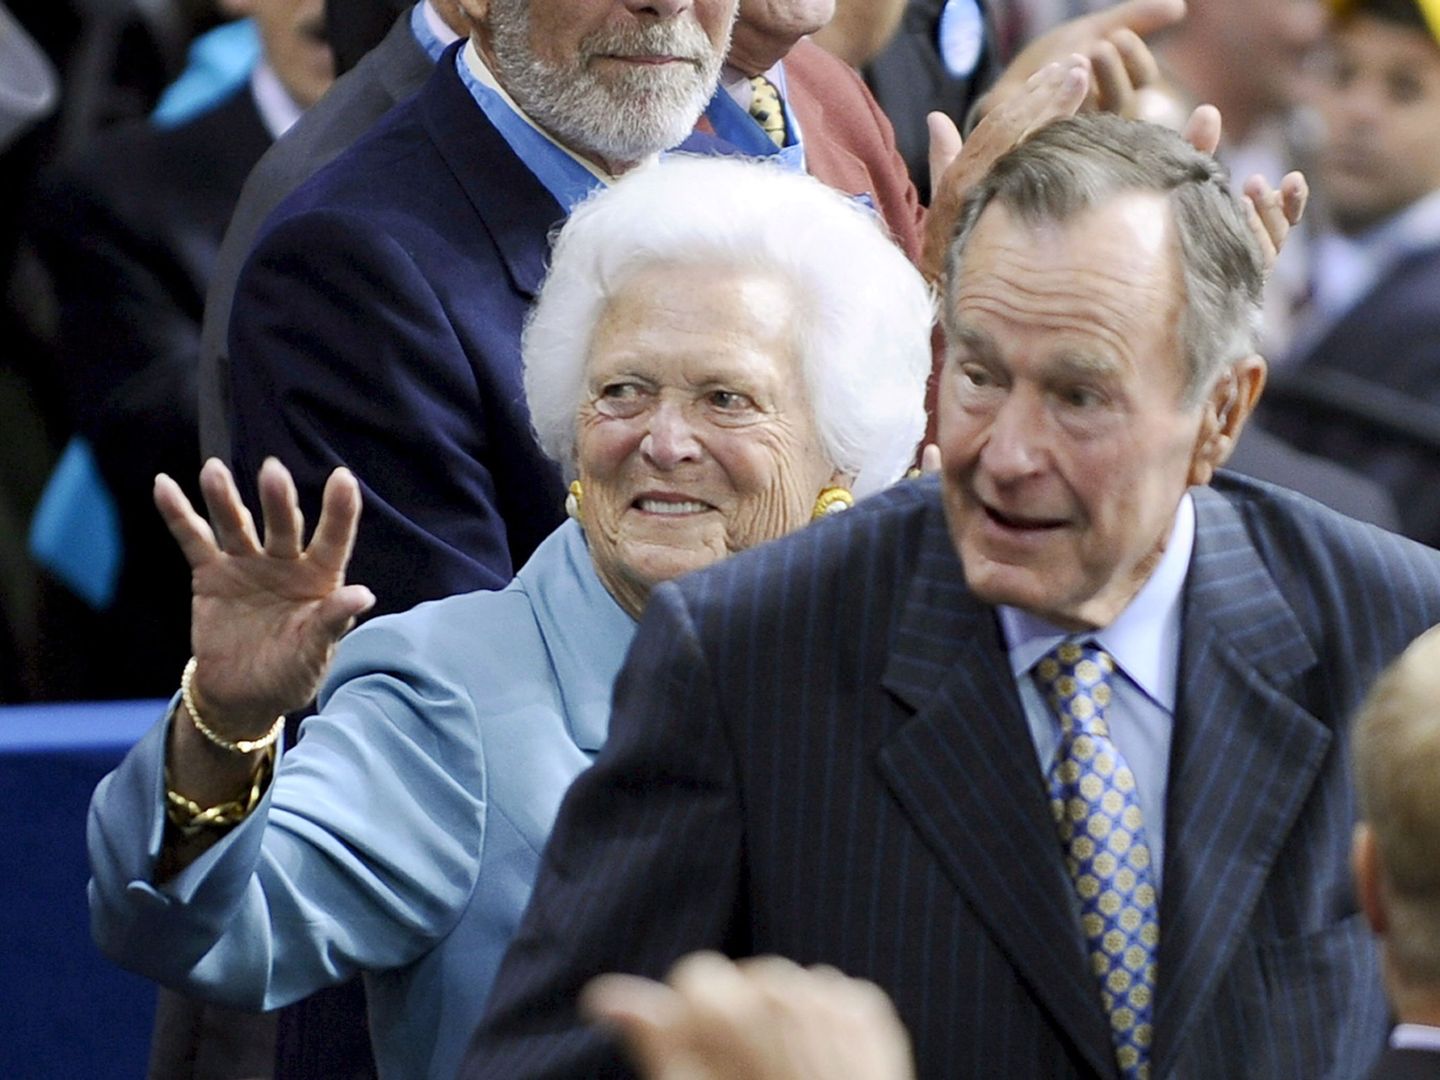 THM22. St. Paul (United States), 02 09 2008.- (FILE) - Former President George H.W. Bush (R) and former First Lady Barbara Bush (L) arrive during the second session of the 2008 Republican National Convention in the Xcel Energy Center in St. Paul, Minnesota, USA, 02 September 2008 (reissued 01 December 2018). According to media reports, George H. W. Bush died at the age of 94 on 30 November 2018. George H.W. Bush was the 41st President of the United States (1989ñ1993). (Estados Unidos) EFE EPA TANNEN MAURY